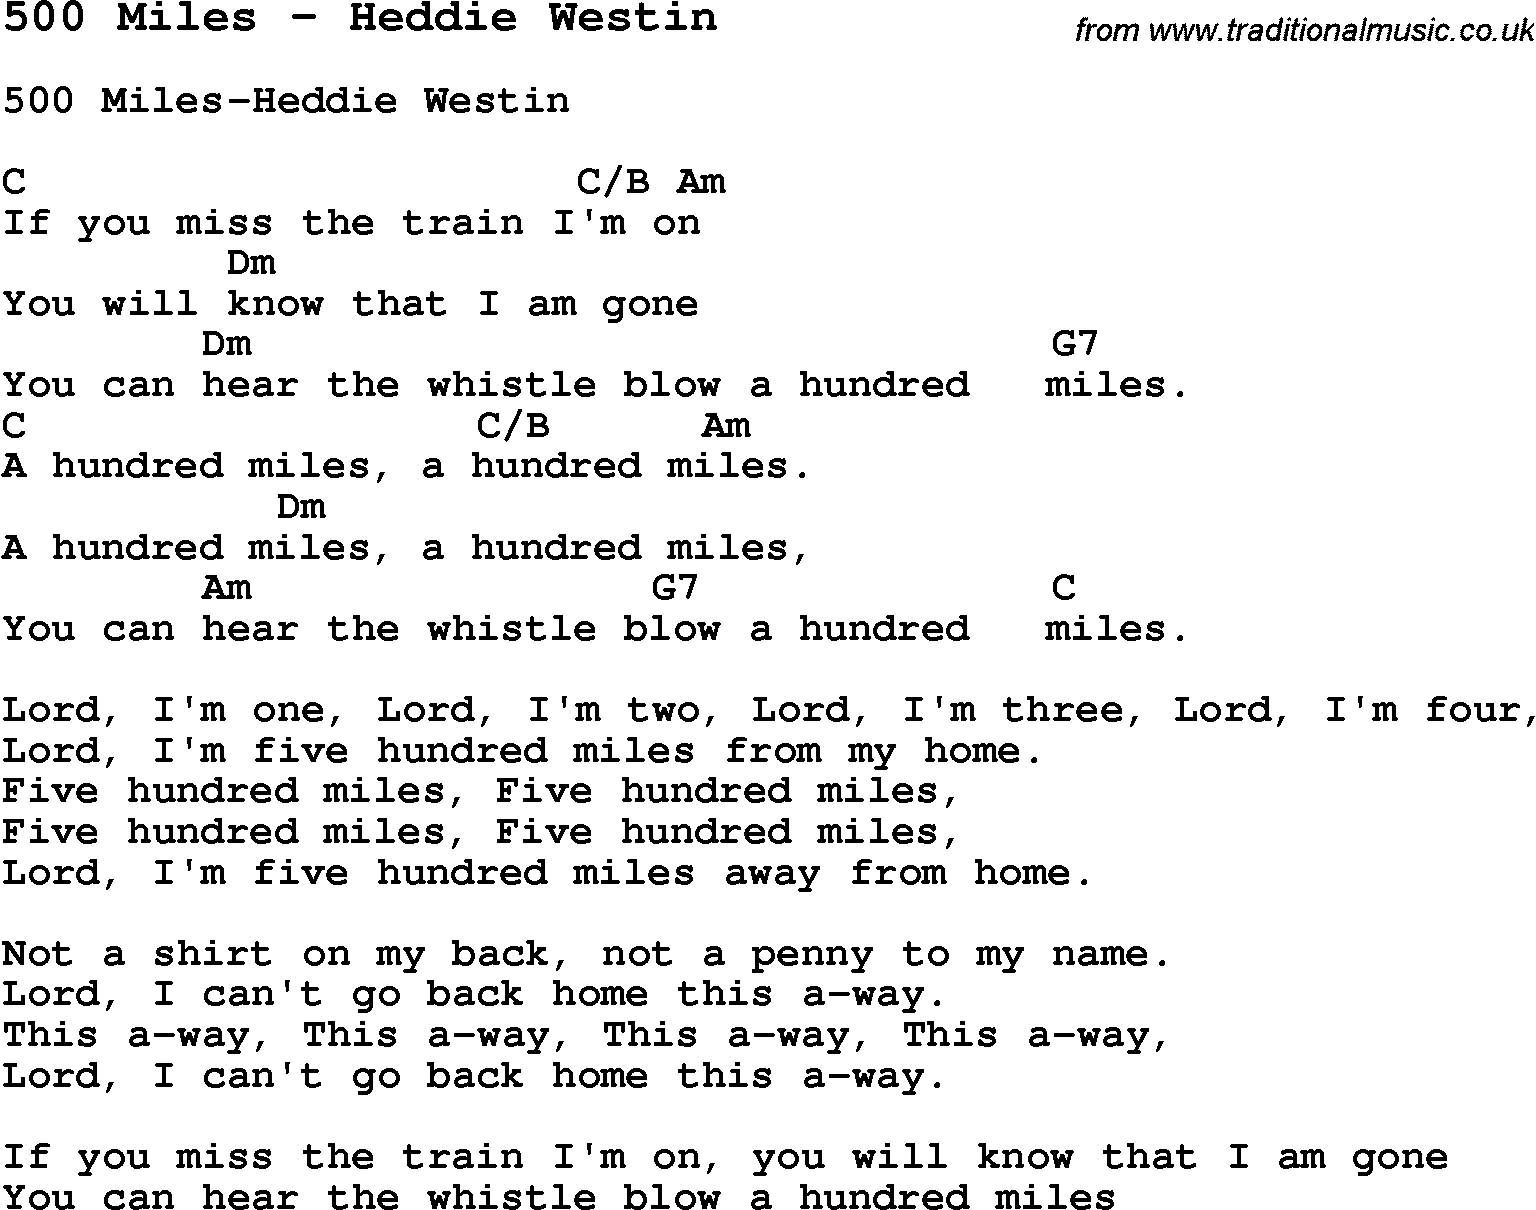 Song 500 Miles by Heddie Westin, with lyrics for vocal performance and accompaniment chords for Ukulele, Guitar Banjo etc.